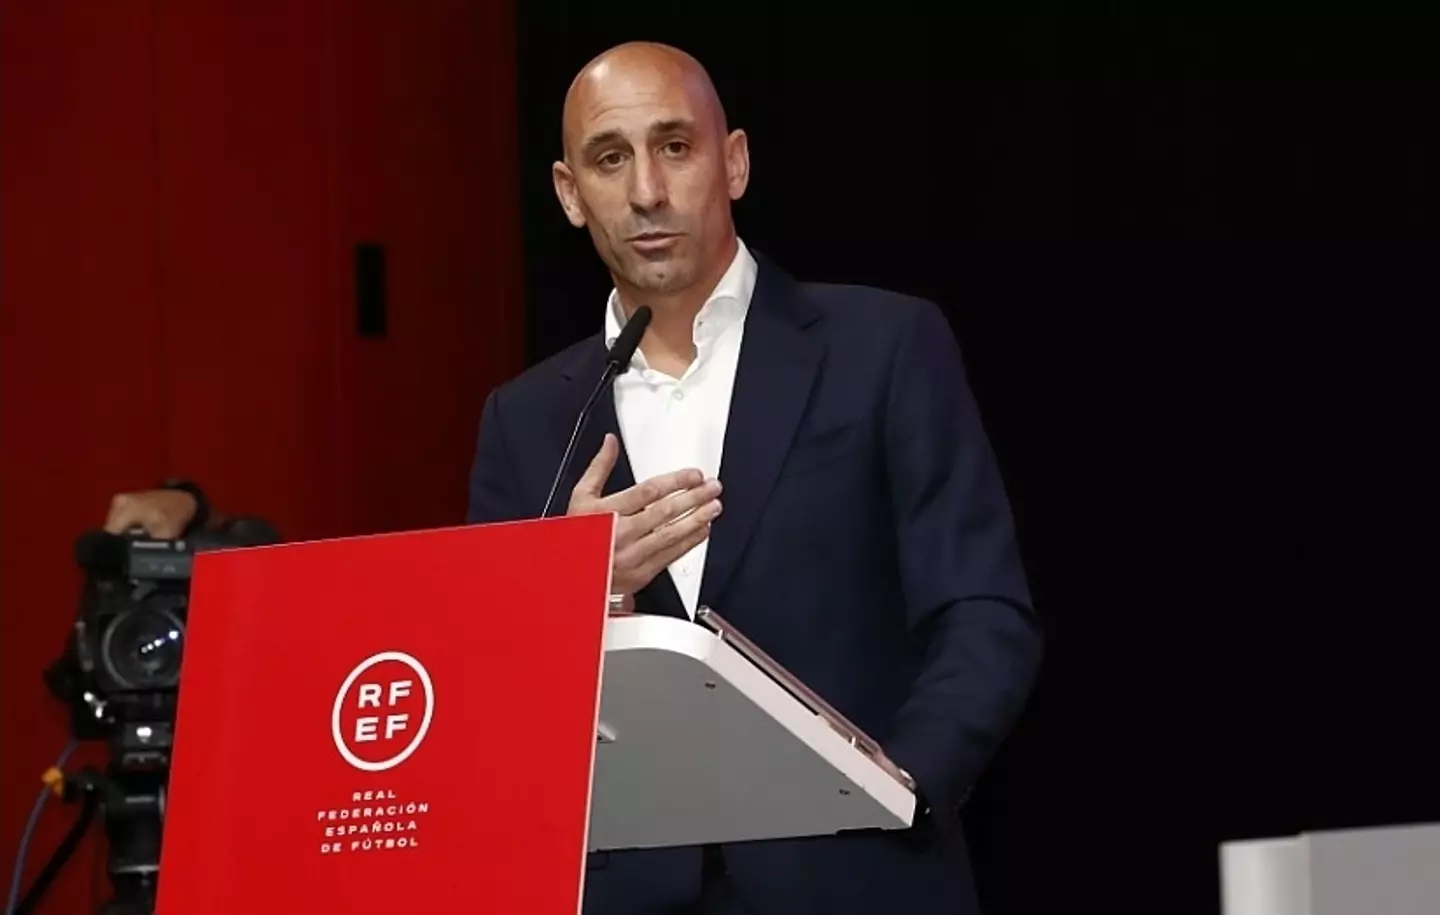 Luis Rubiales and the RFEF have threatened legal action